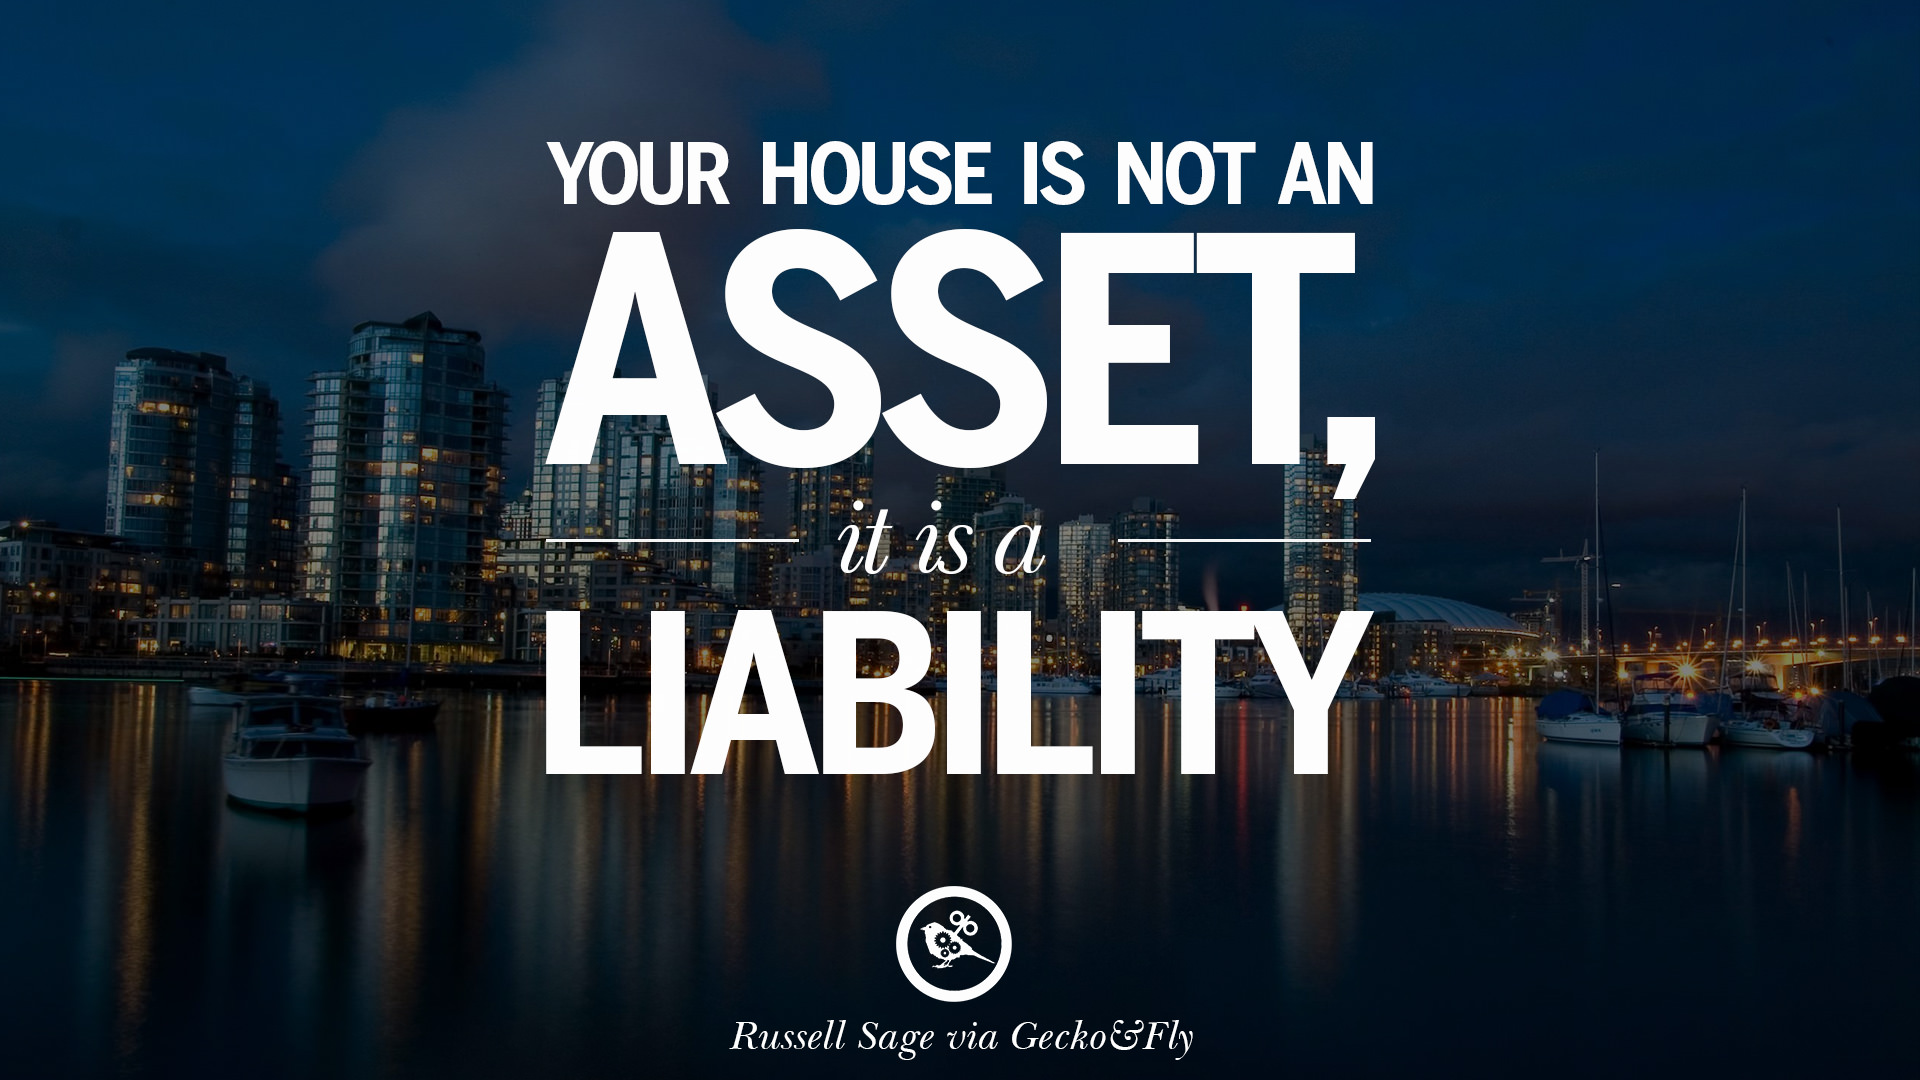 property-investment-investing-quotes-06.jpg